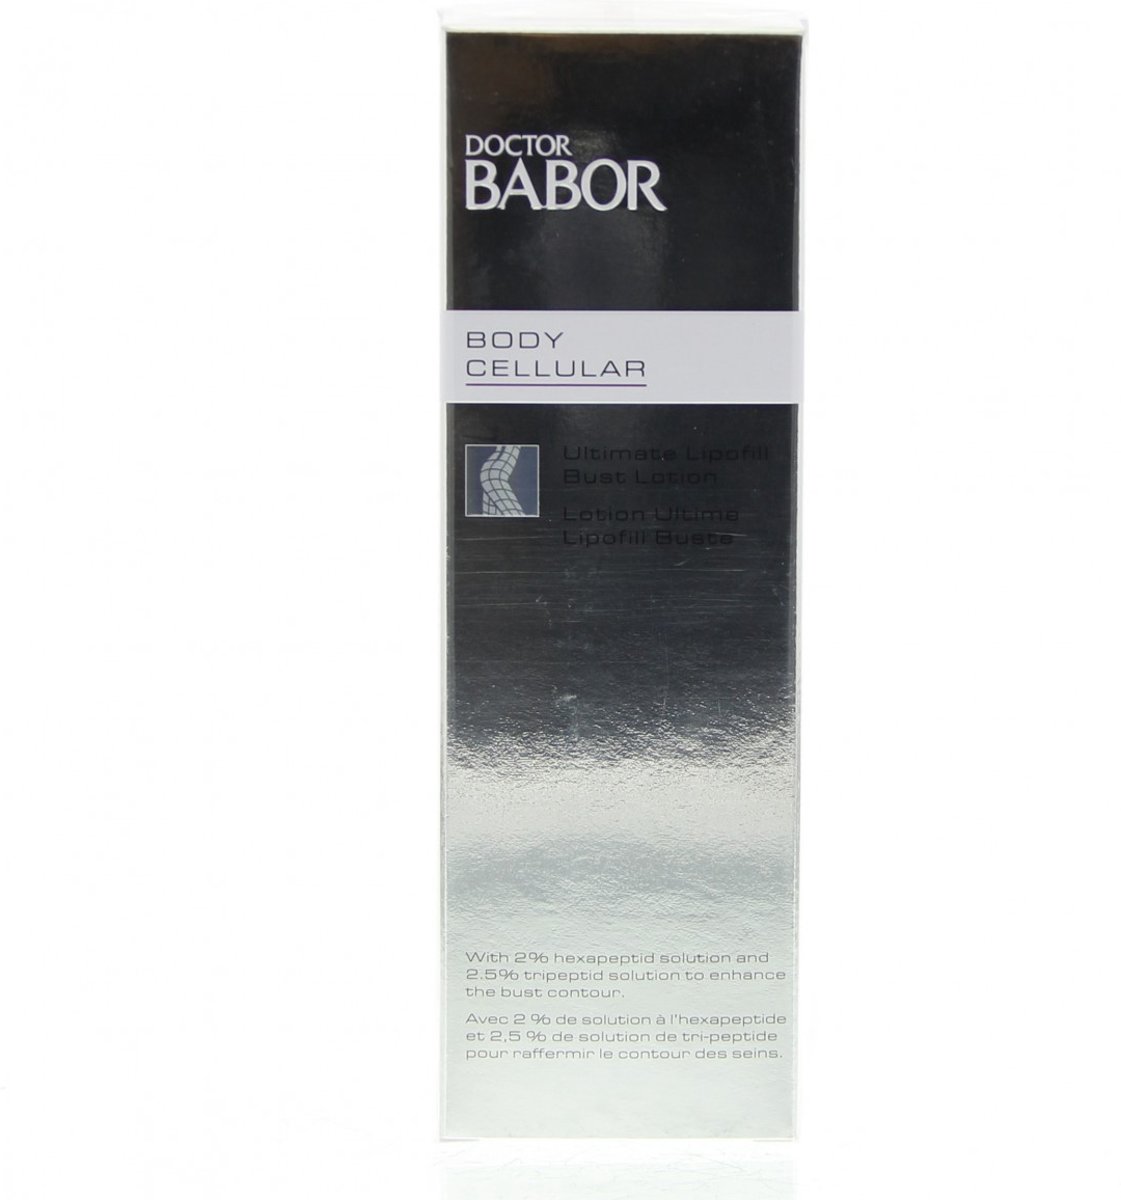 Foto van Babor Doctor Babor Body Cellular Ultimate Lipofill Bust Lotion.